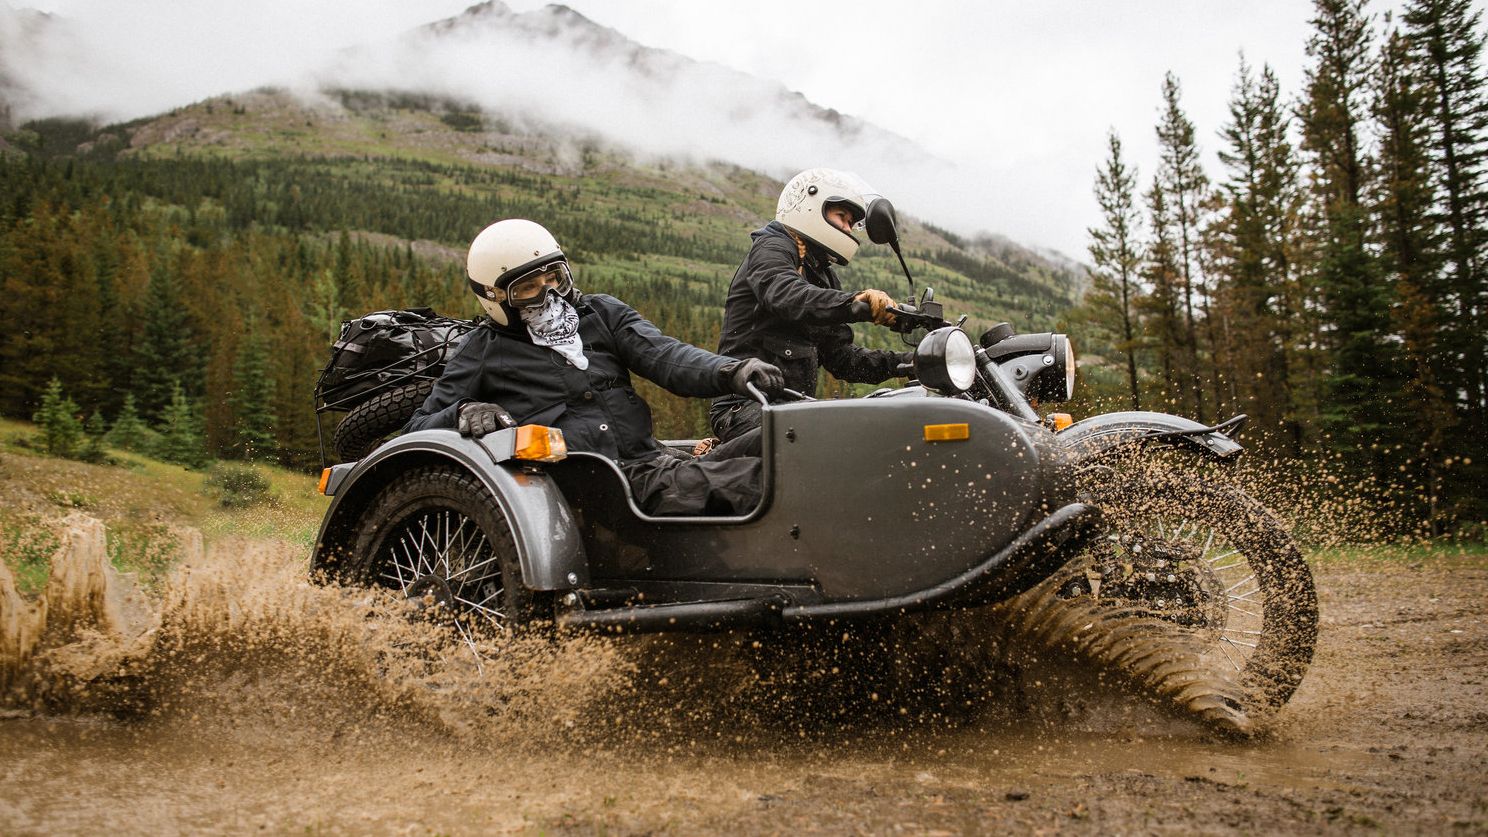 2018 Ural Gear Up Picture, Photo, Wallpaper